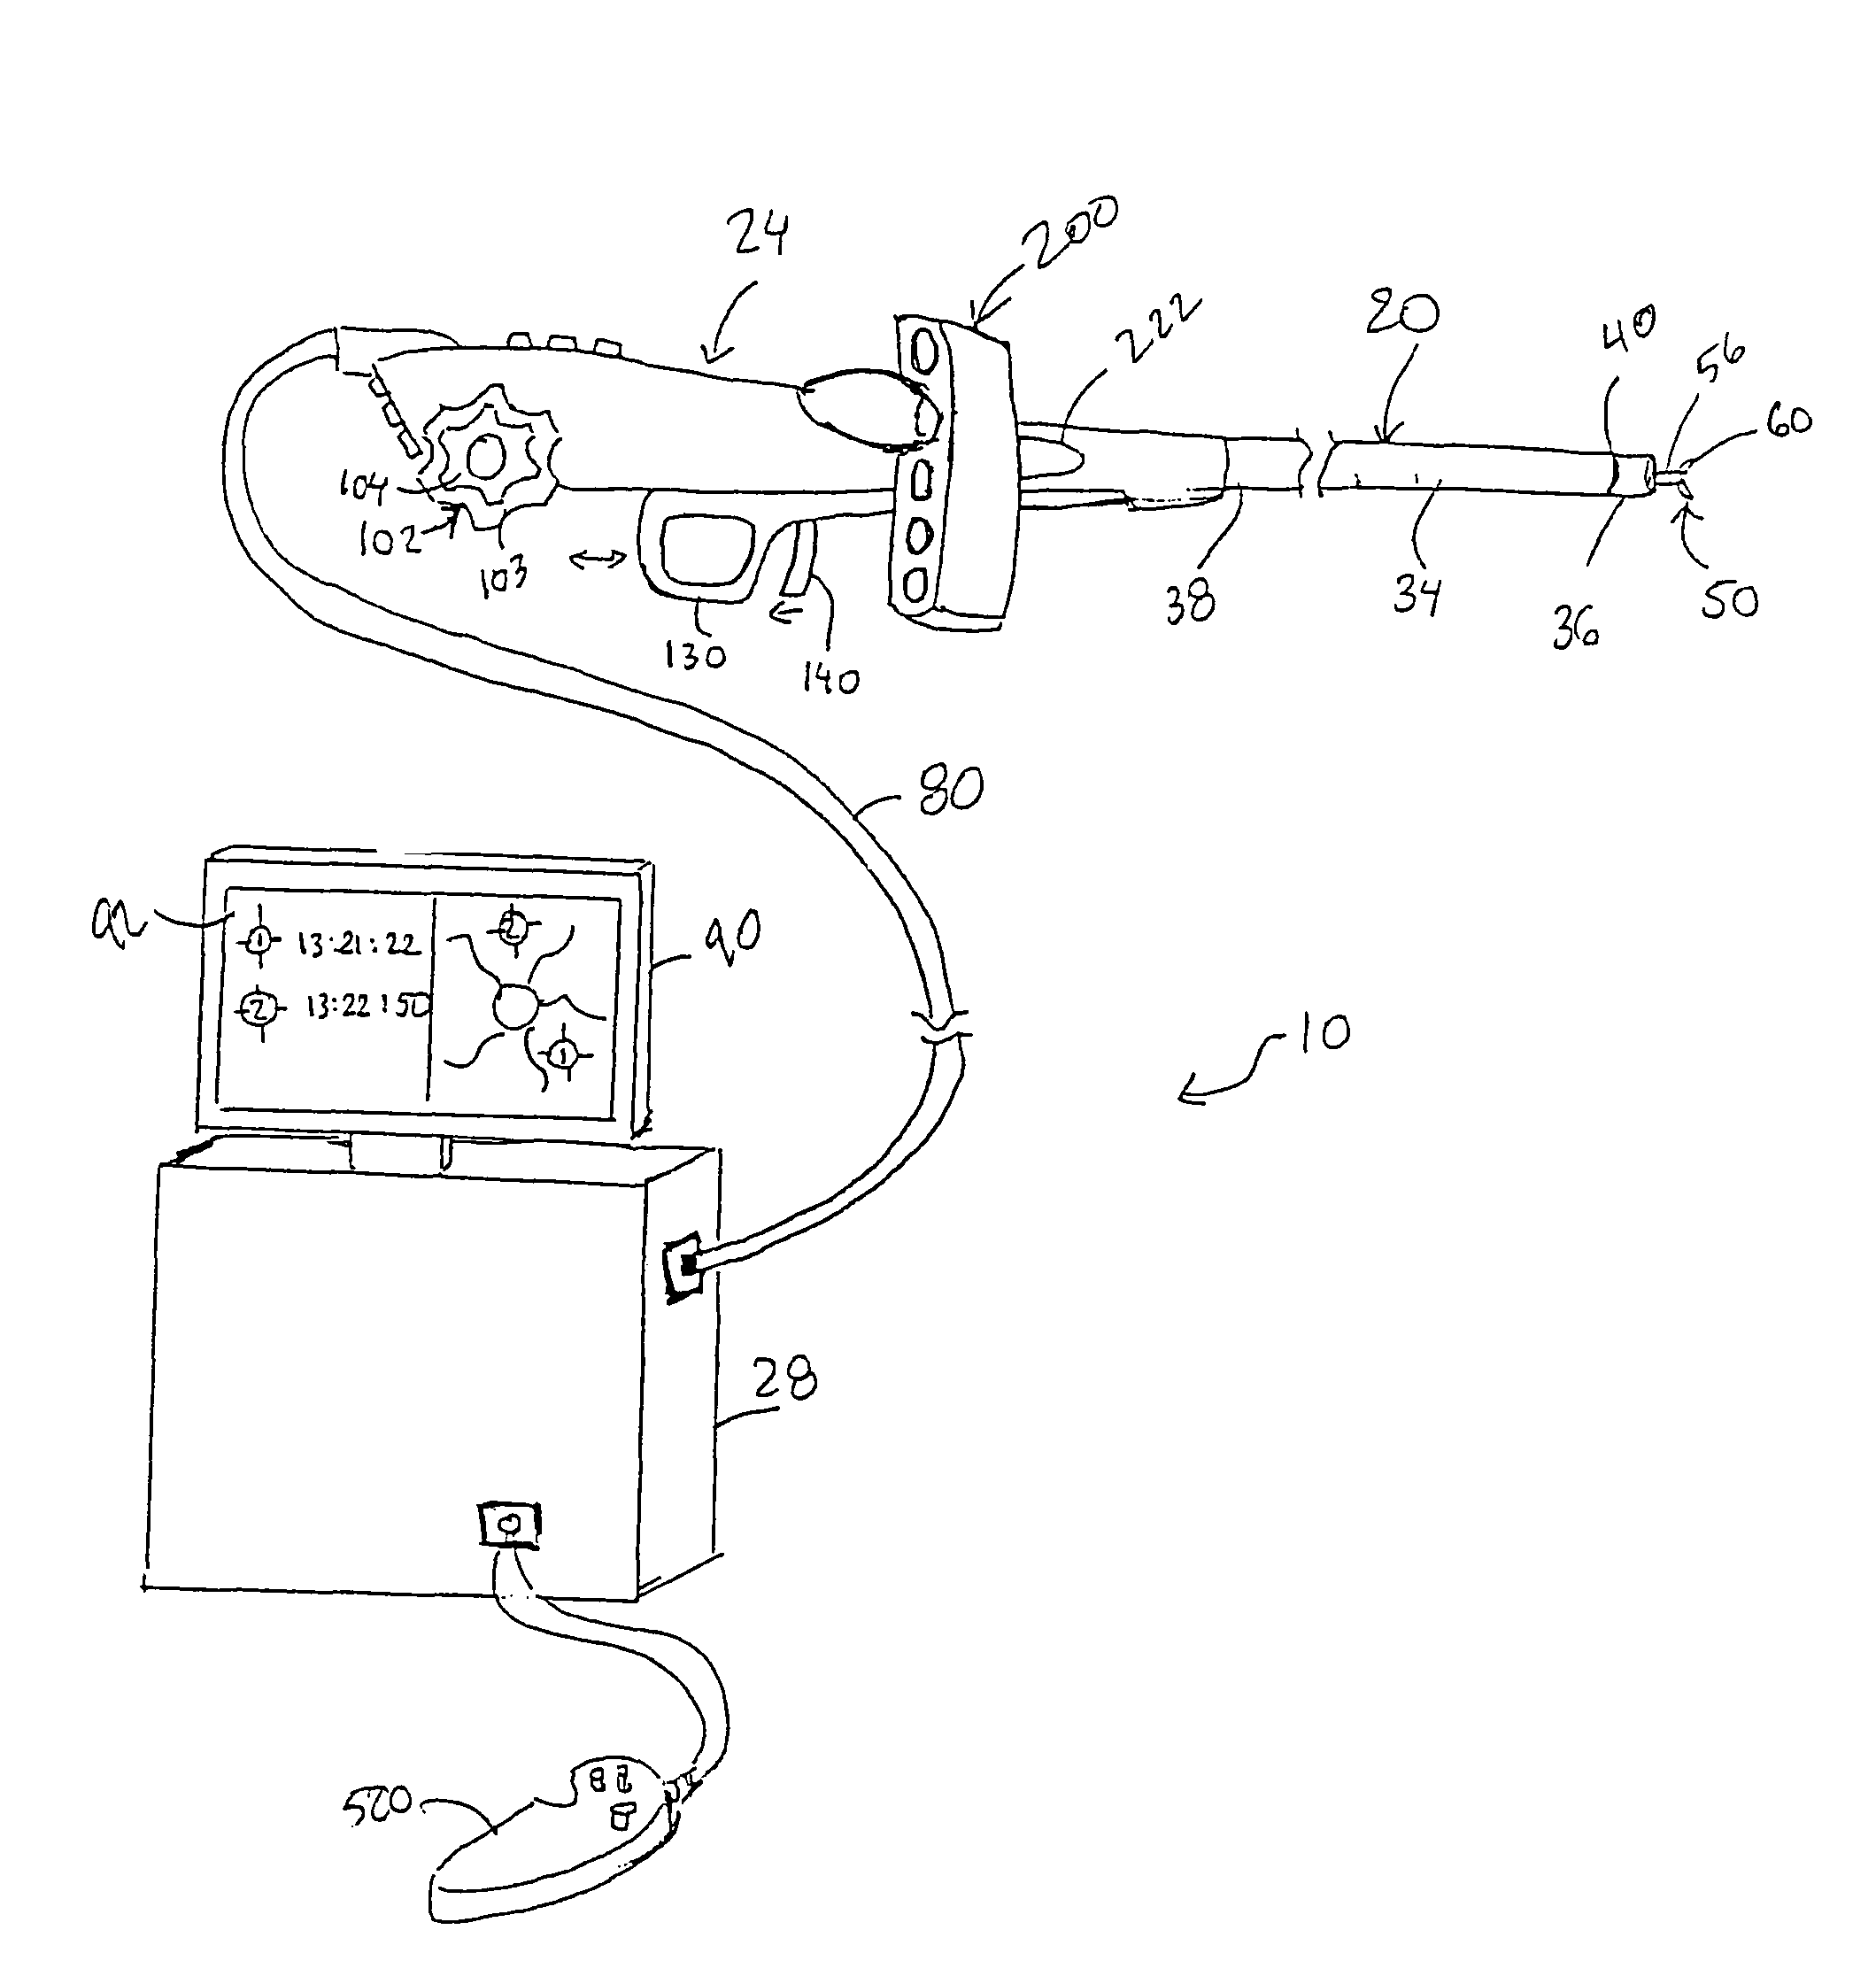 Endoscopic apparatus with integrated multiple biopsy device